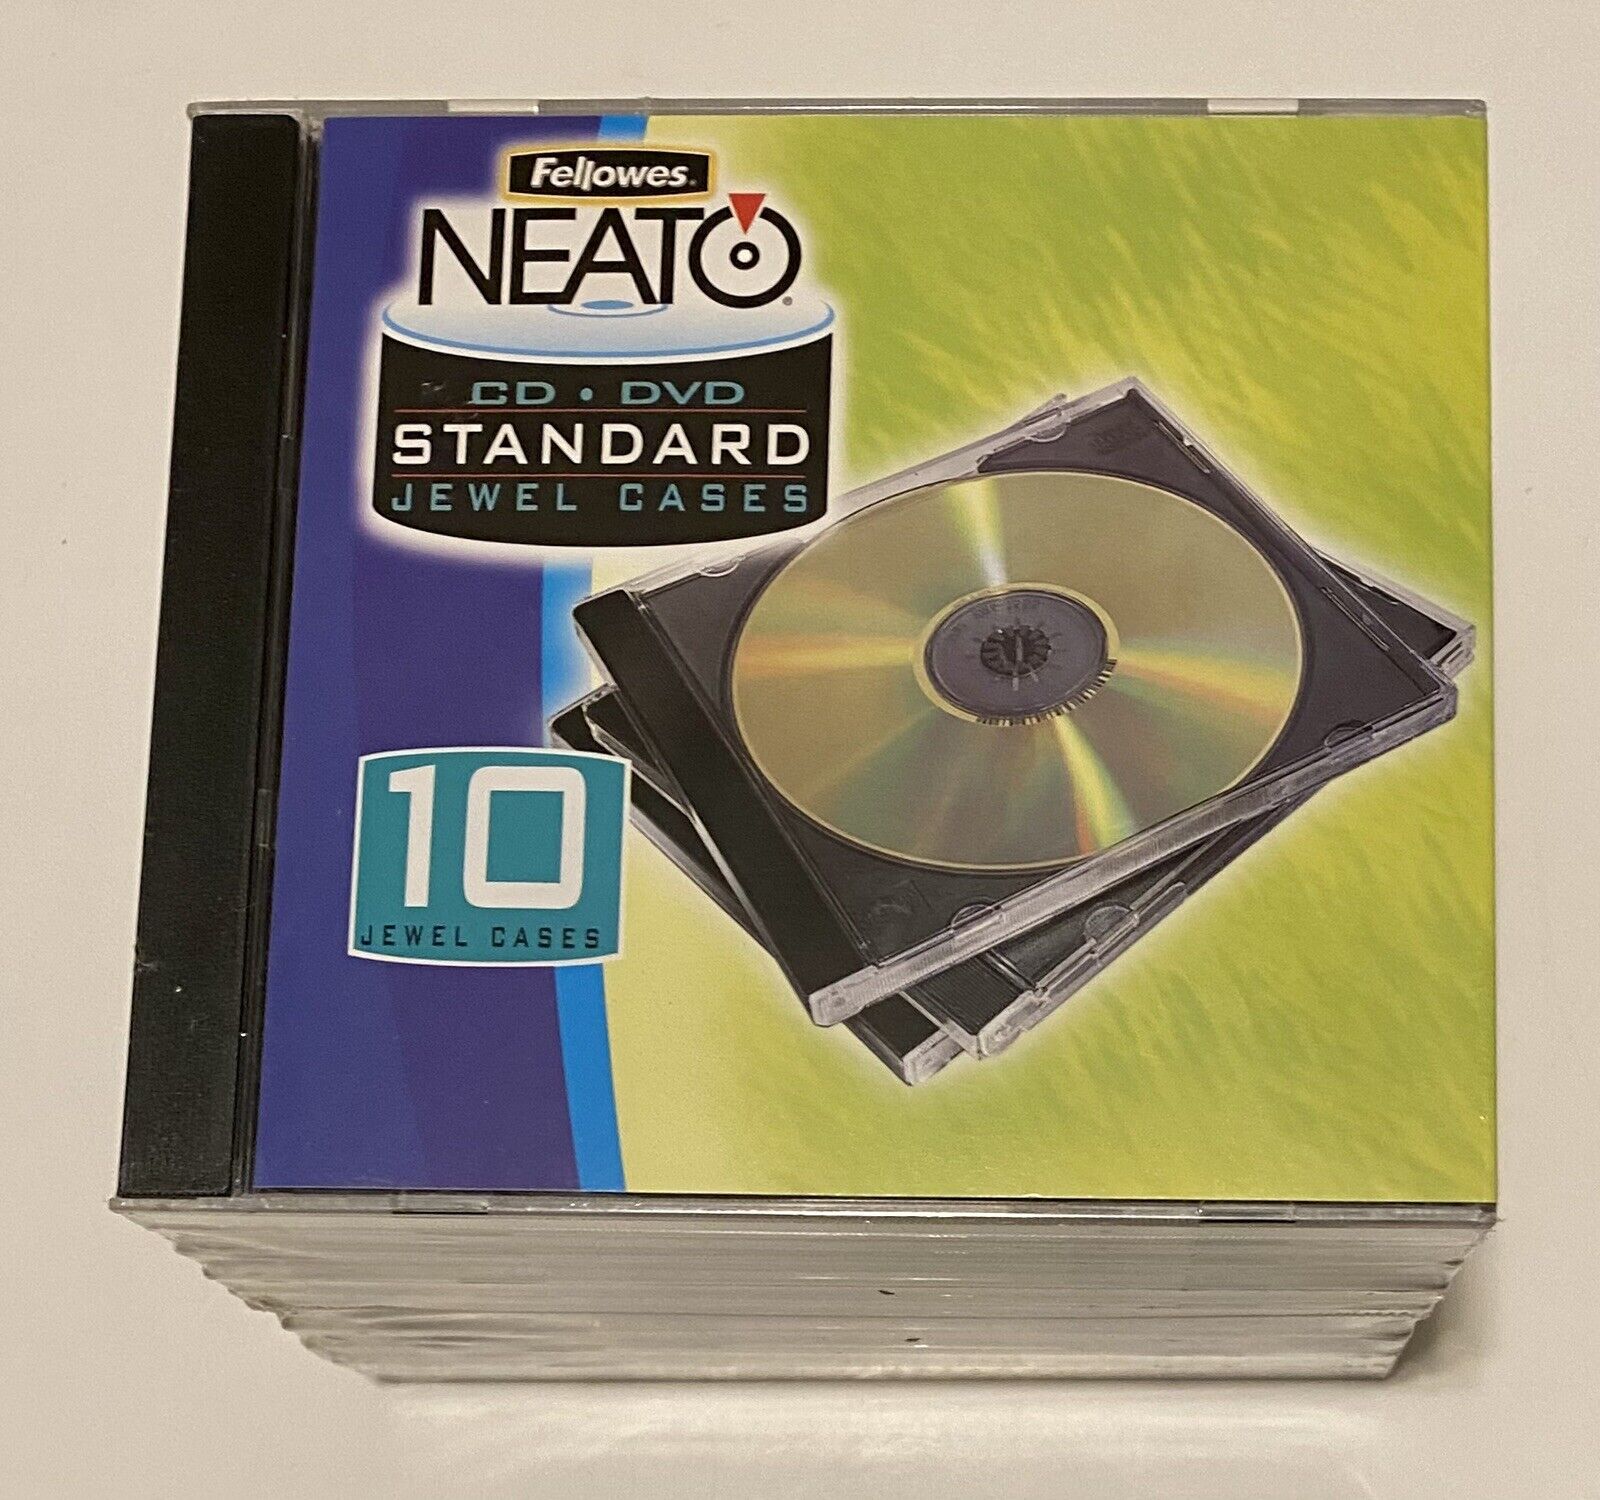 Pack of 10 Standard Jewel Cases Fellowes Max 62% OFF Neato for DVD Topics on TV CD Brand